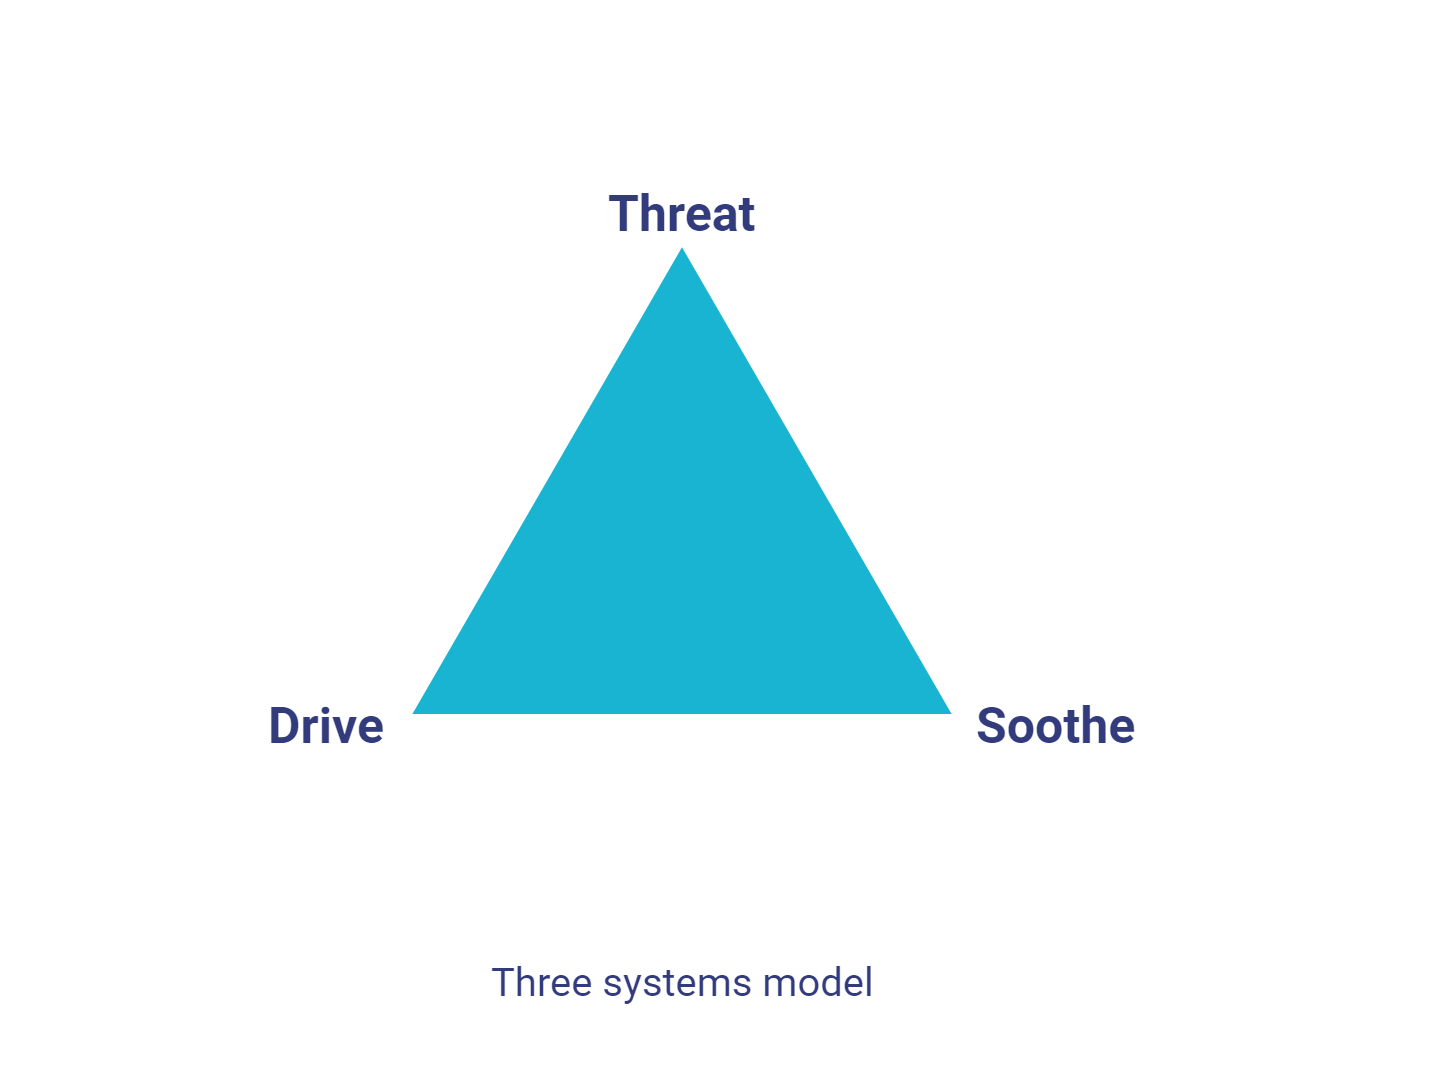 Diagram showing triangle of the three systems model, including threat, drive and soothe.